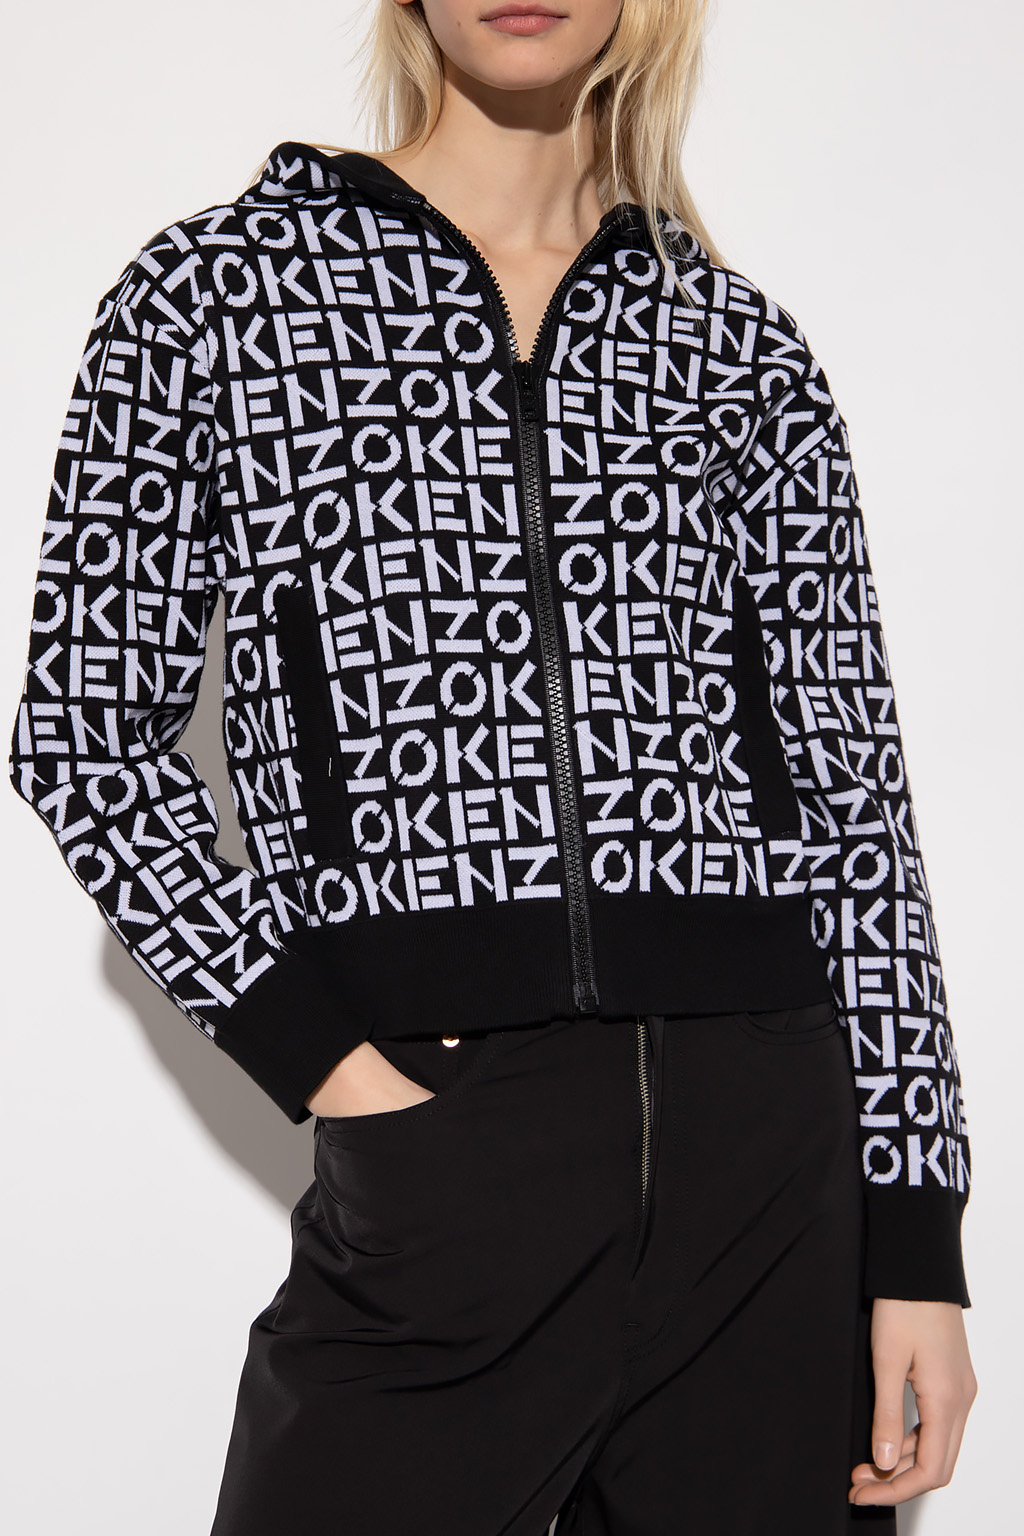 Kenzo Embroidered hoodie